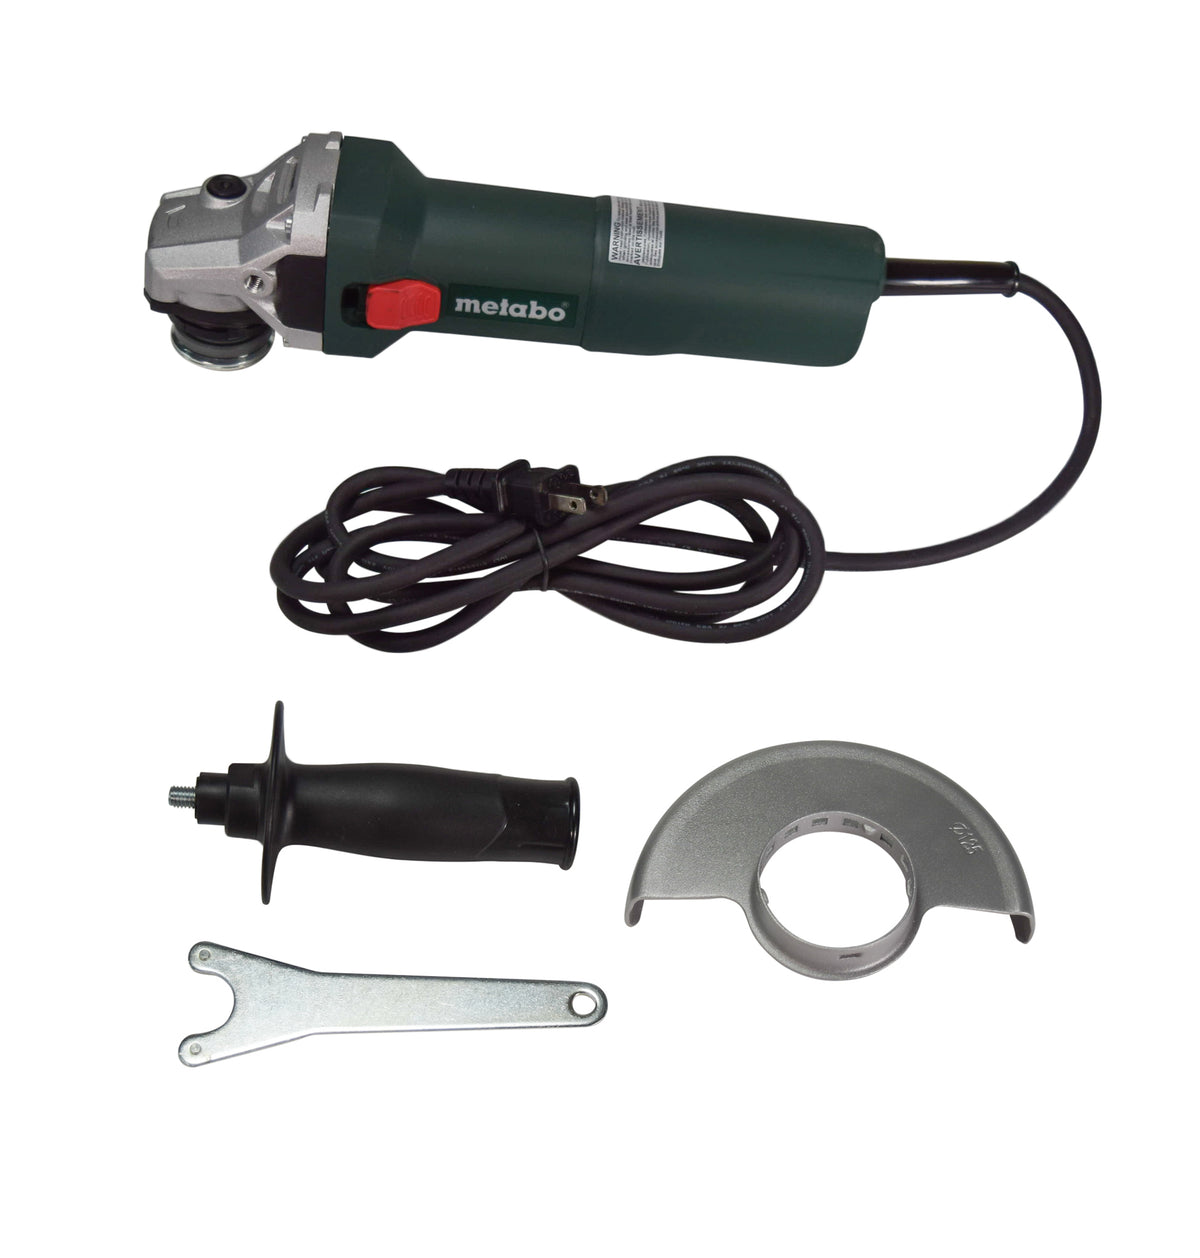 Metabo 603614420 W 1100-125 11 Amp 12,000 RPM 4.5" / 5" Corded Angle Grind